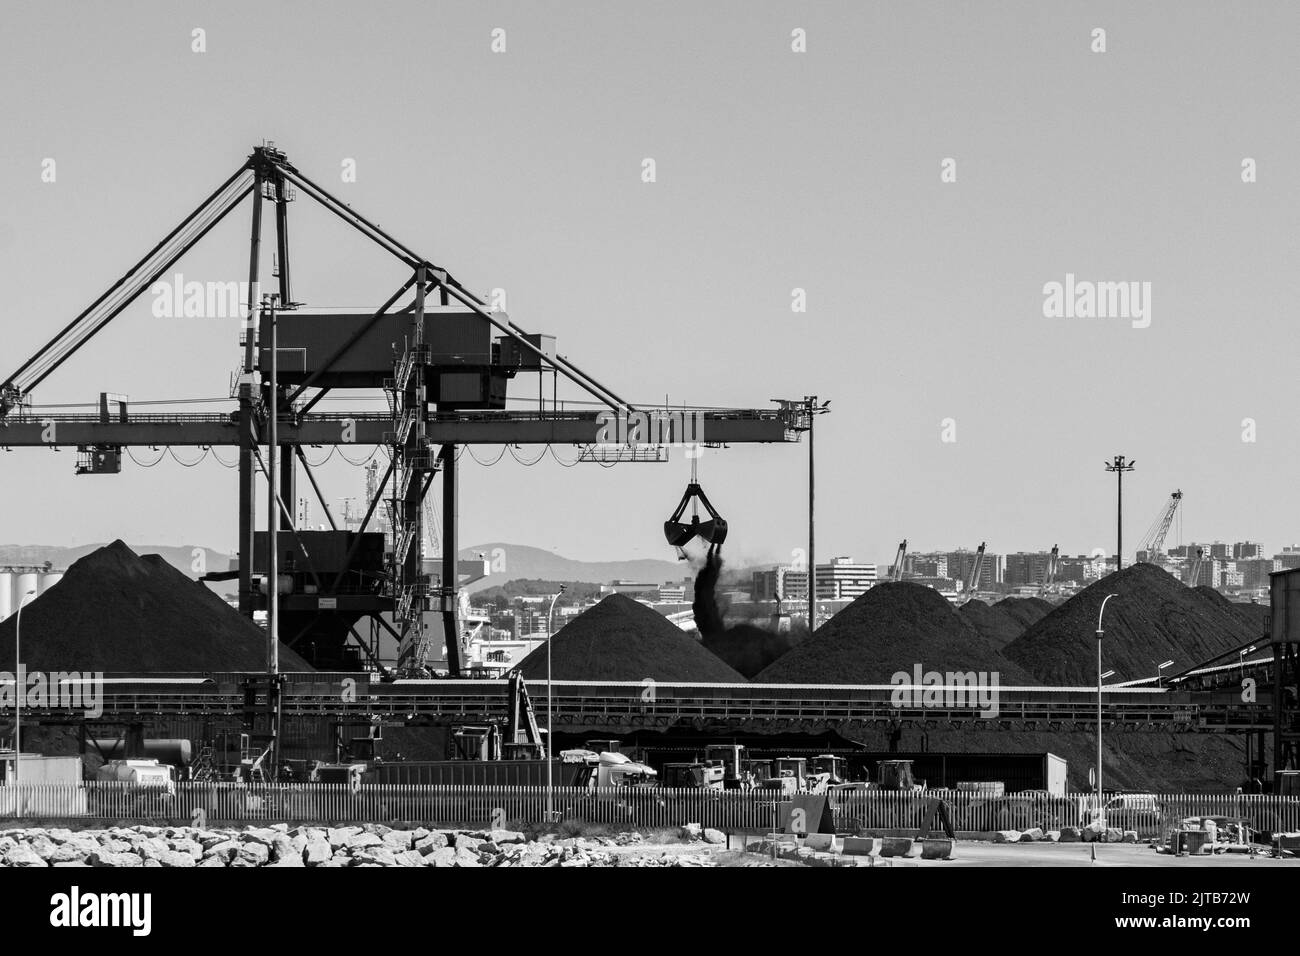 Discharge of residuals from petrochemical industries at the port of Tarragona, Spain Stock Photo